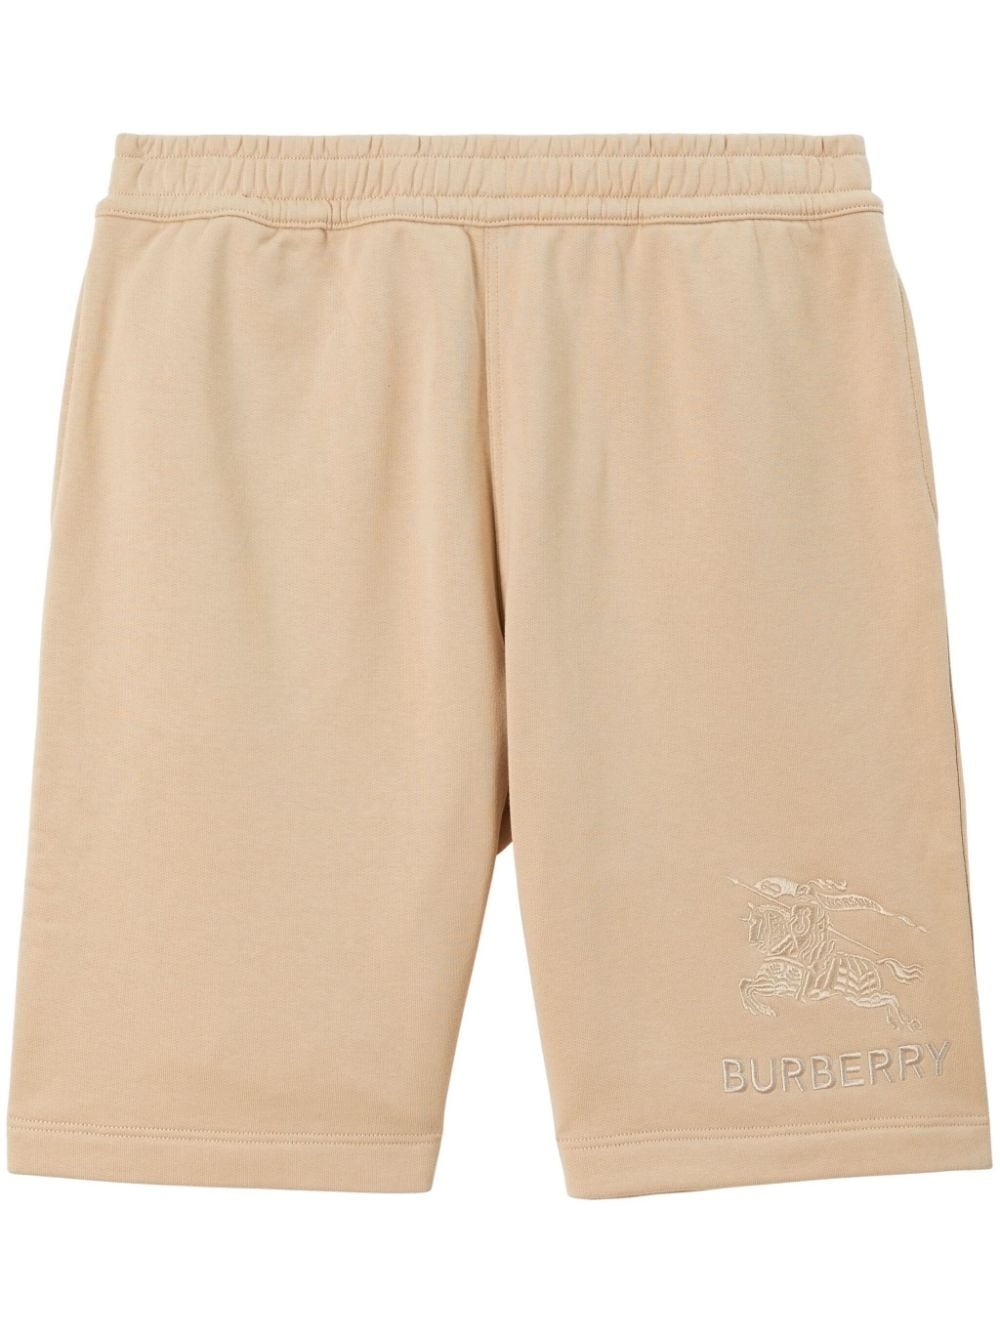 EDK-embroidery track shorts - 1